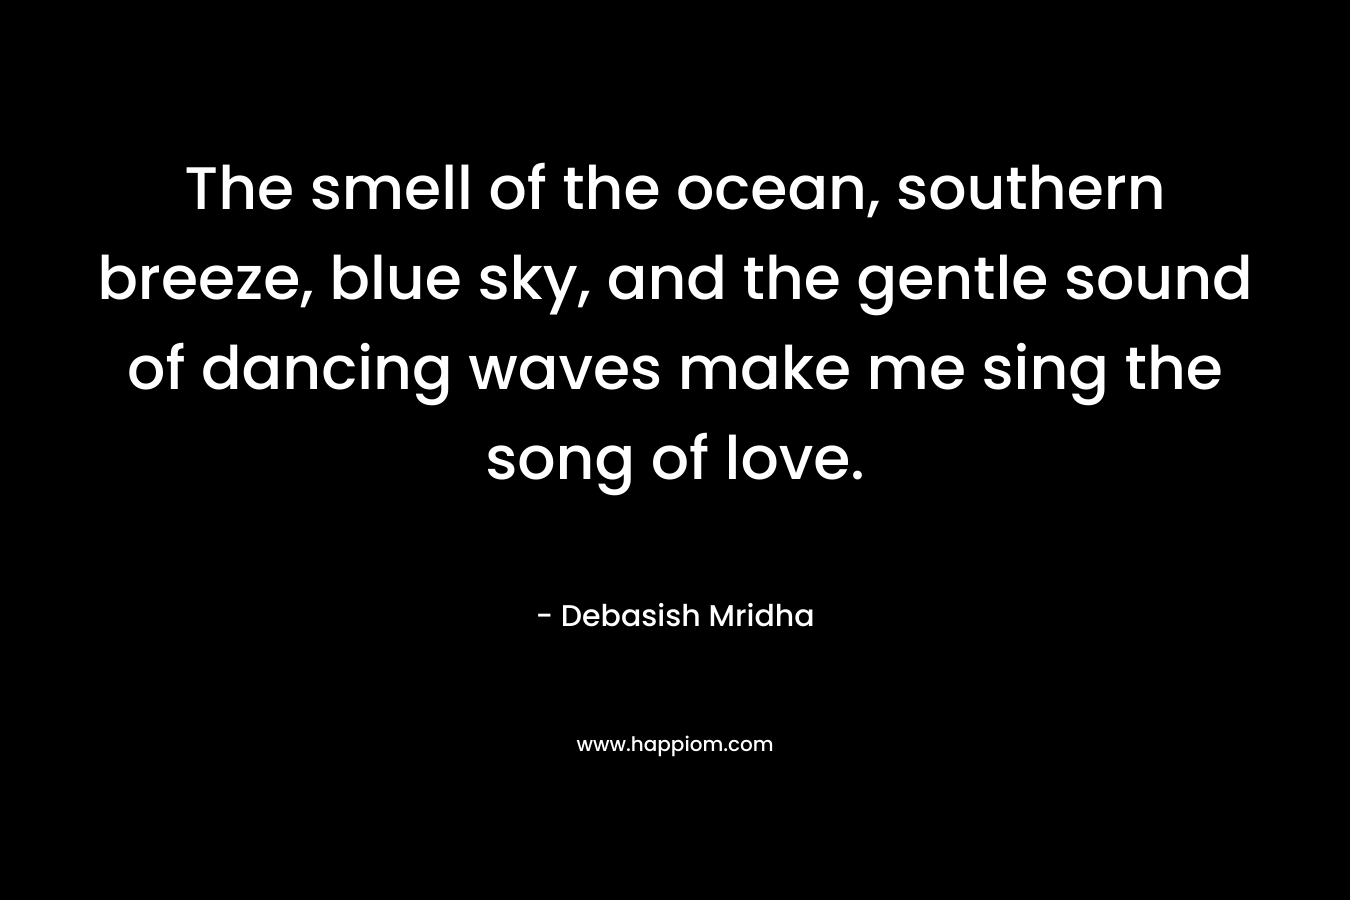 The smell of the ocean, southern breeze, blue sky, and the gentle sound of dancing waves make me sing the song of love.